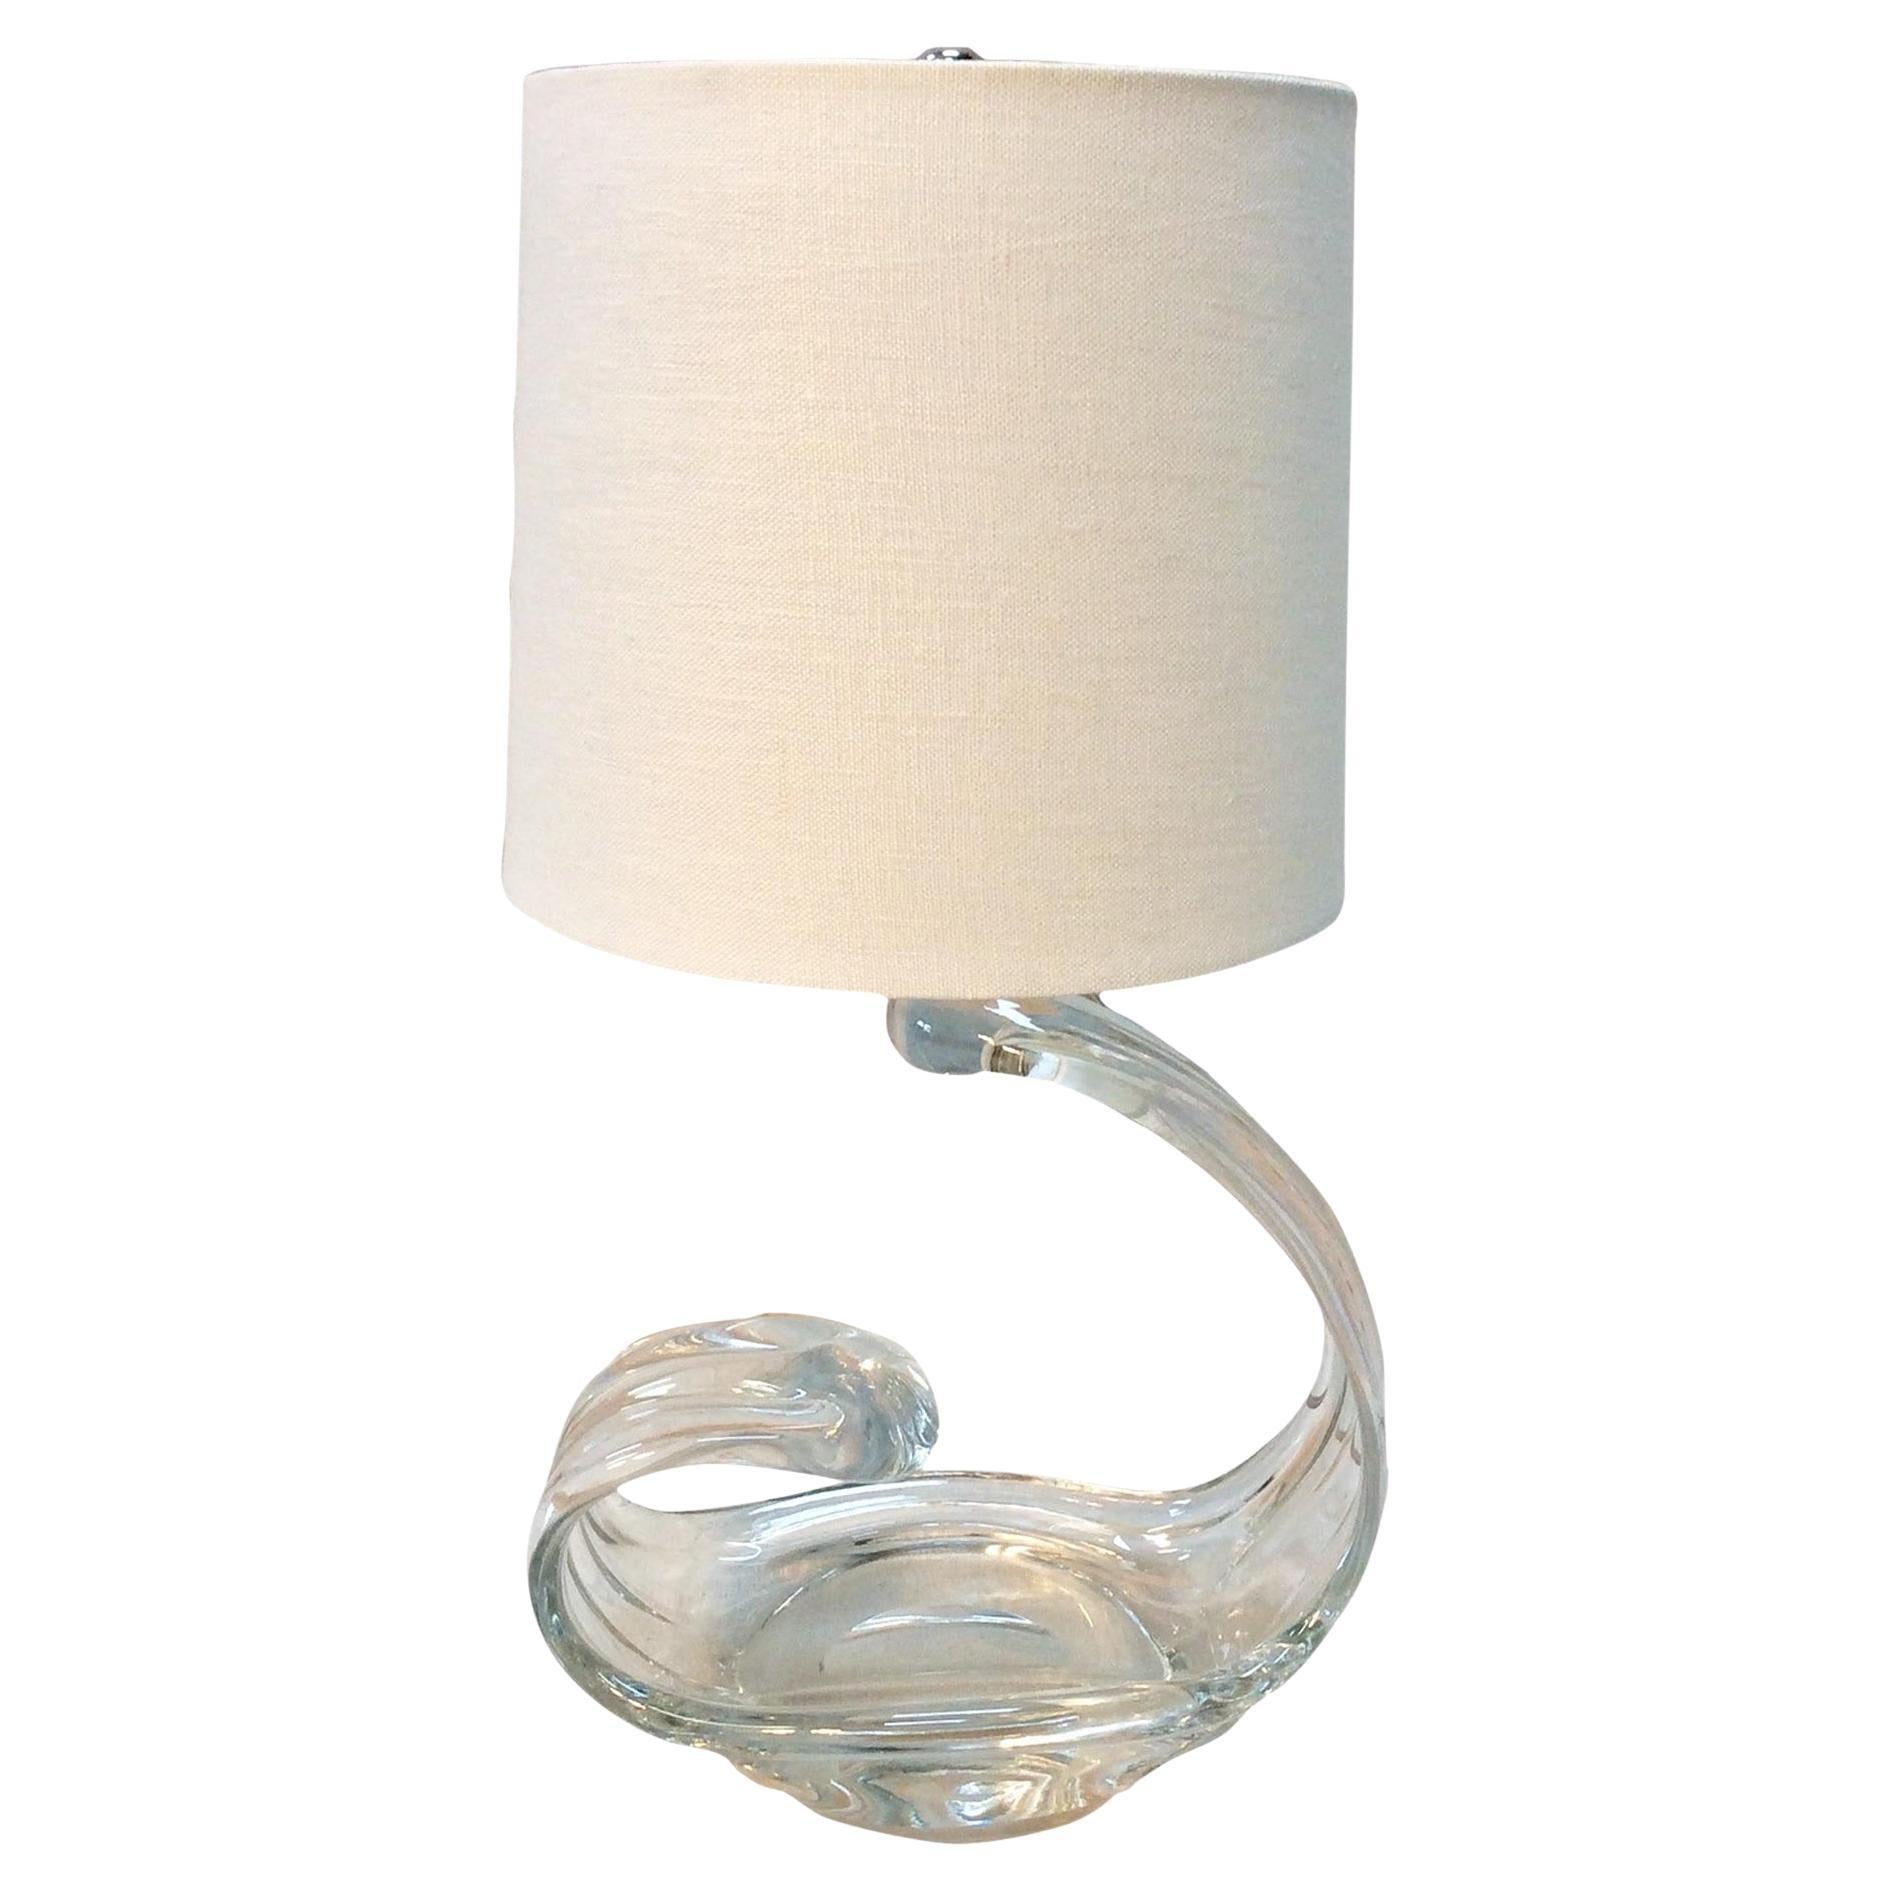 Mid-20th Century French Art Glass Table Lamp For Sale